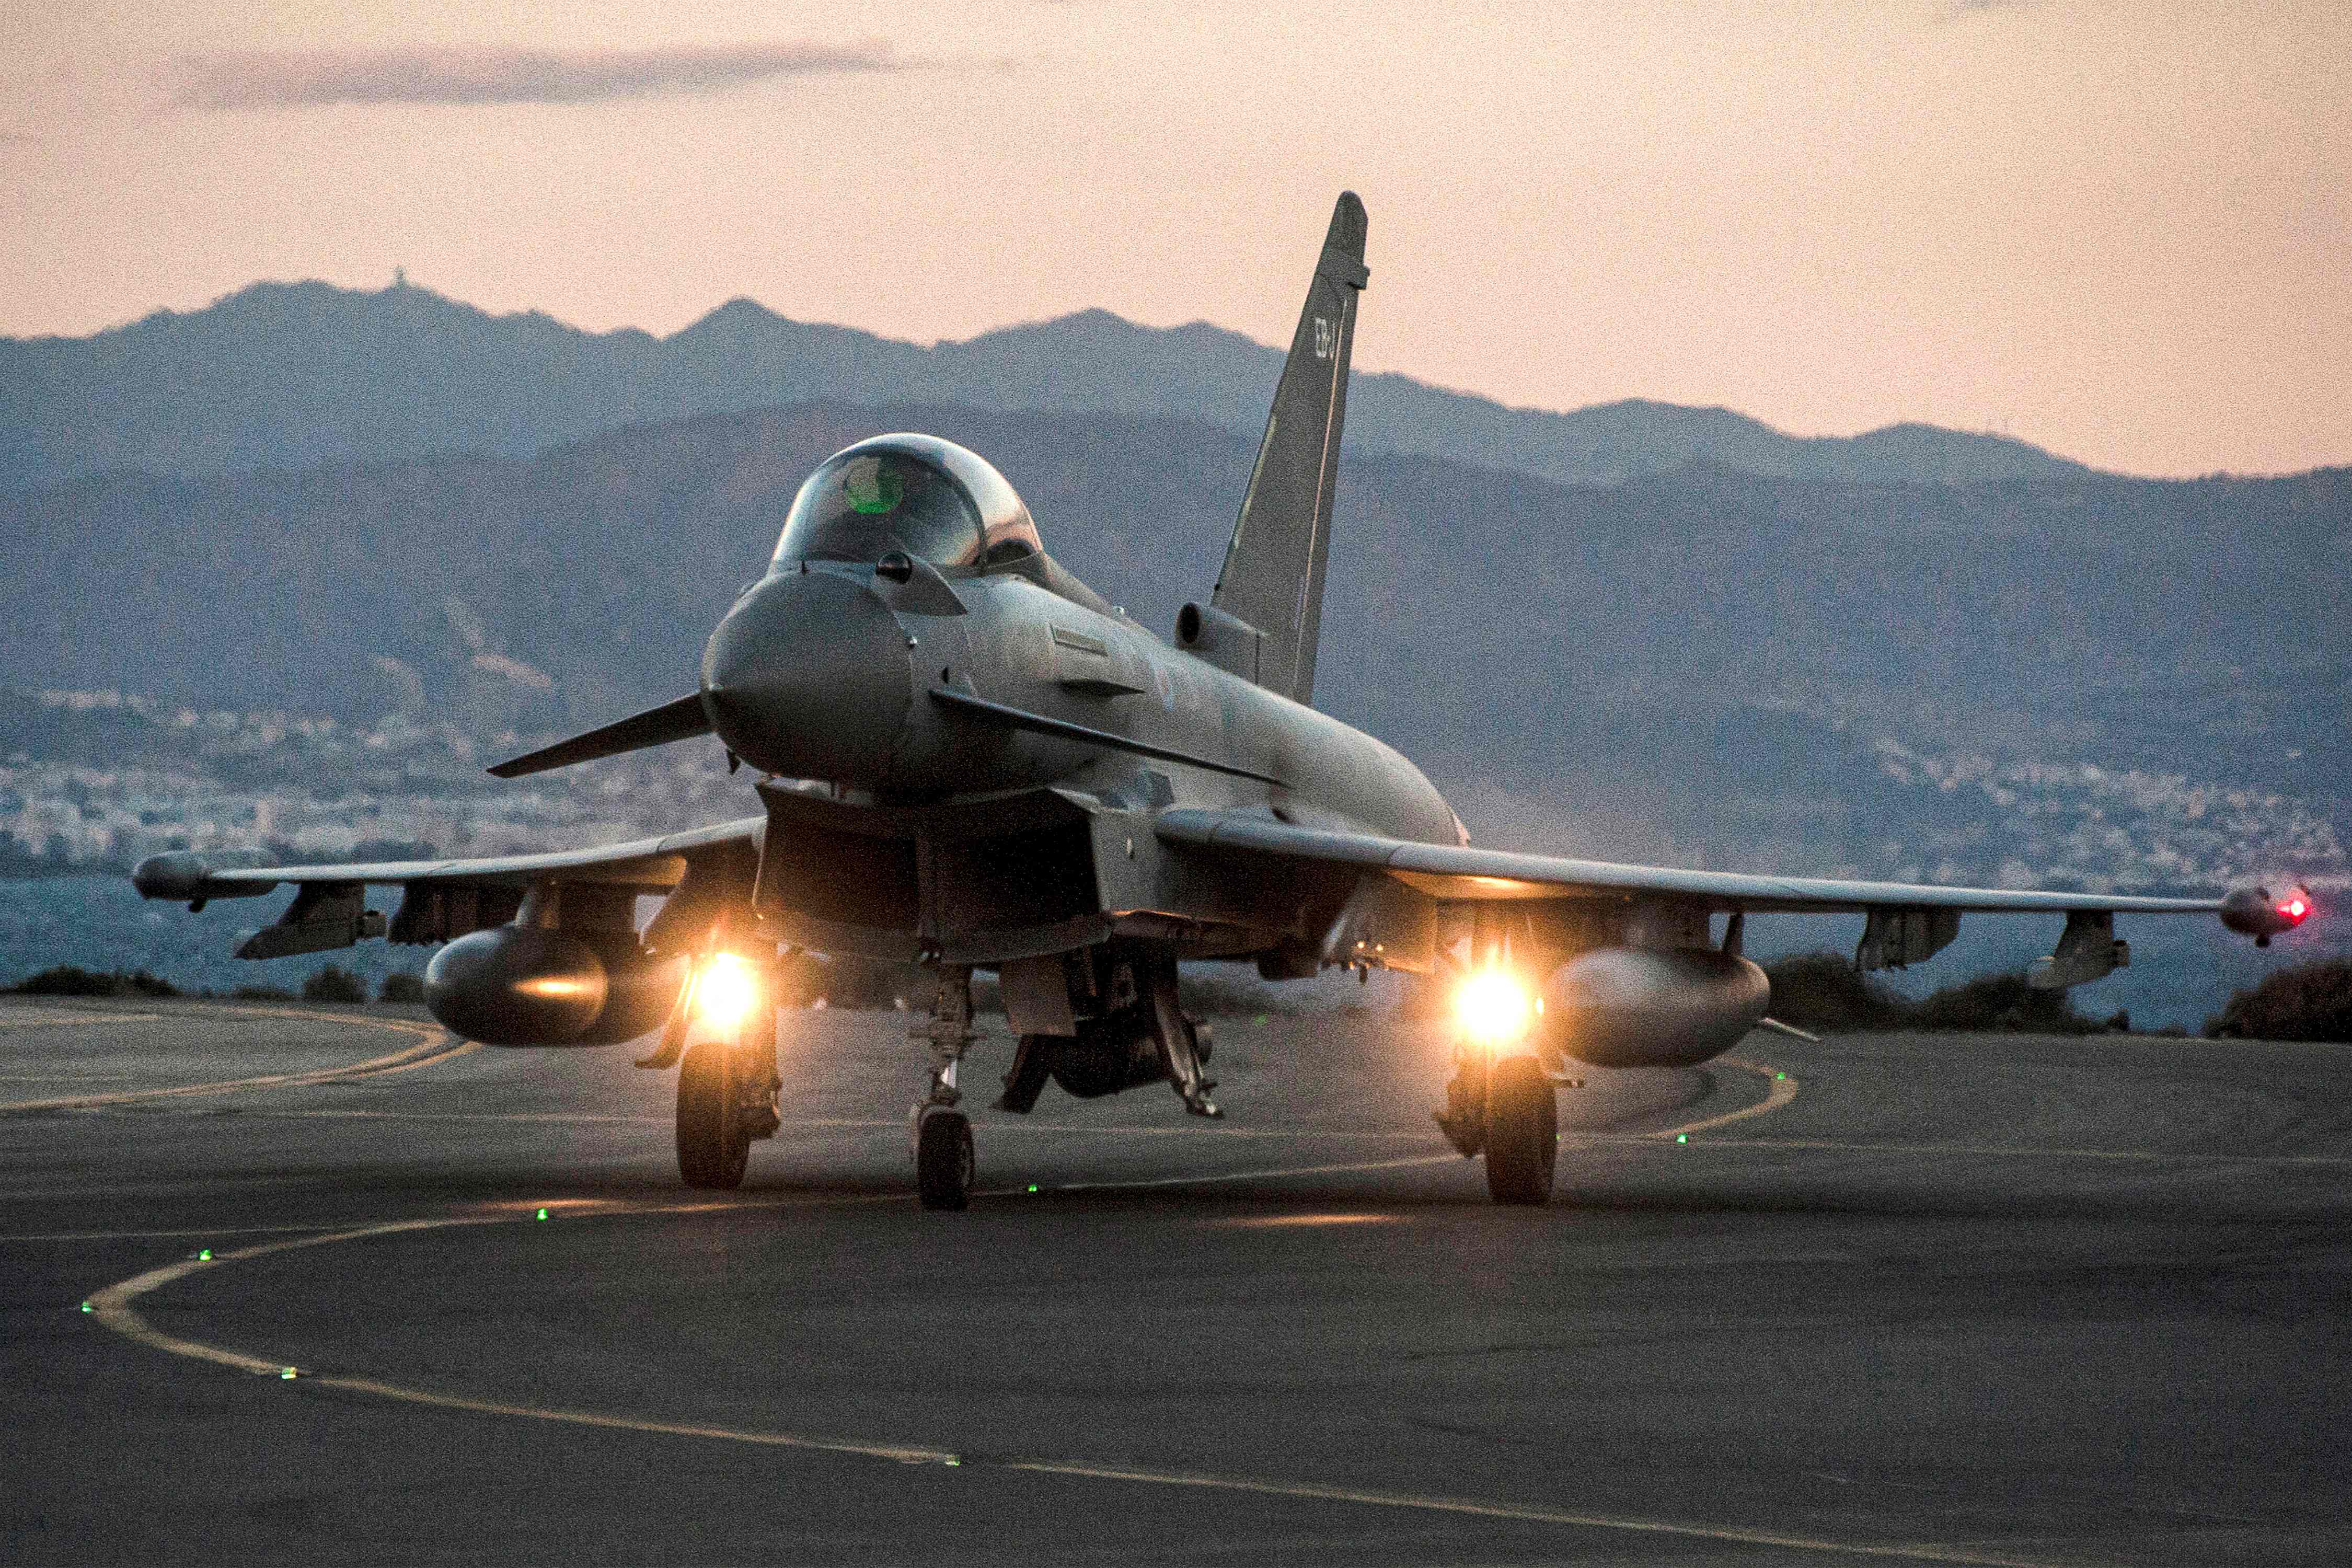 A British Royal Air Force Eurofighter Typhoon fighter jet